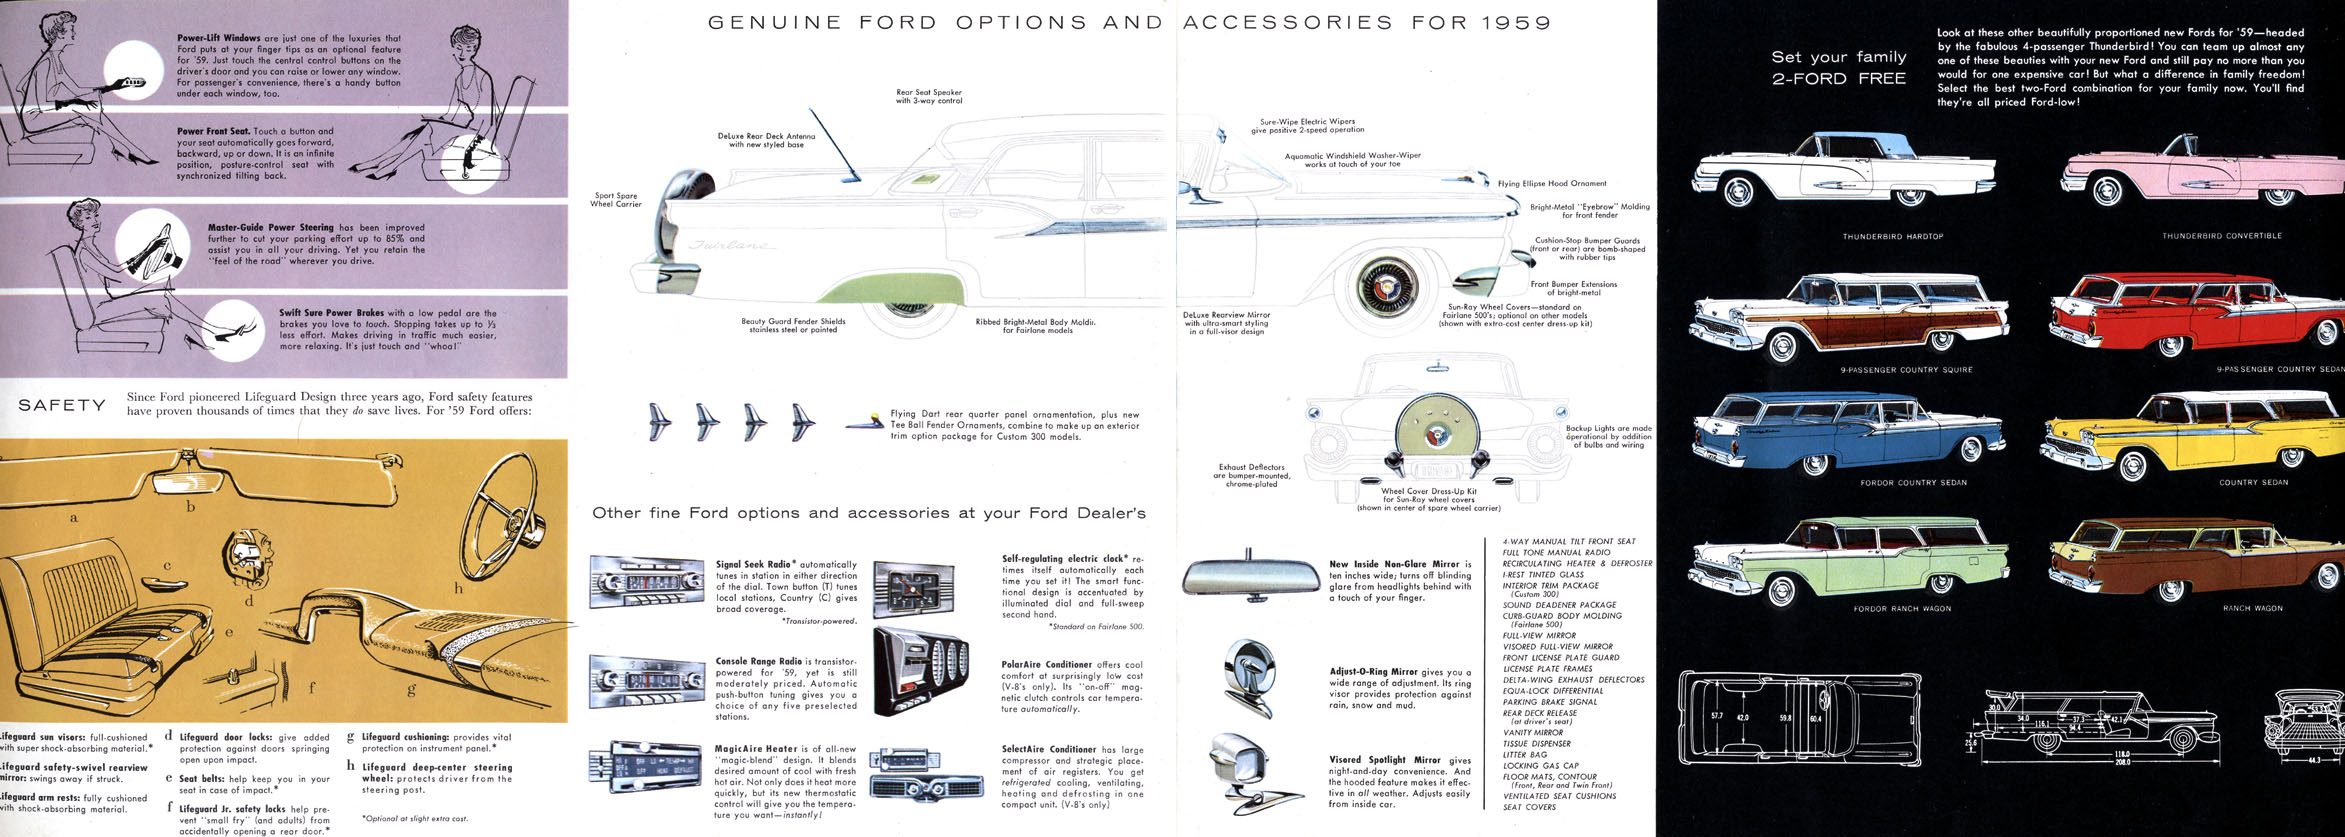 1959 Ford Brochure Page 8